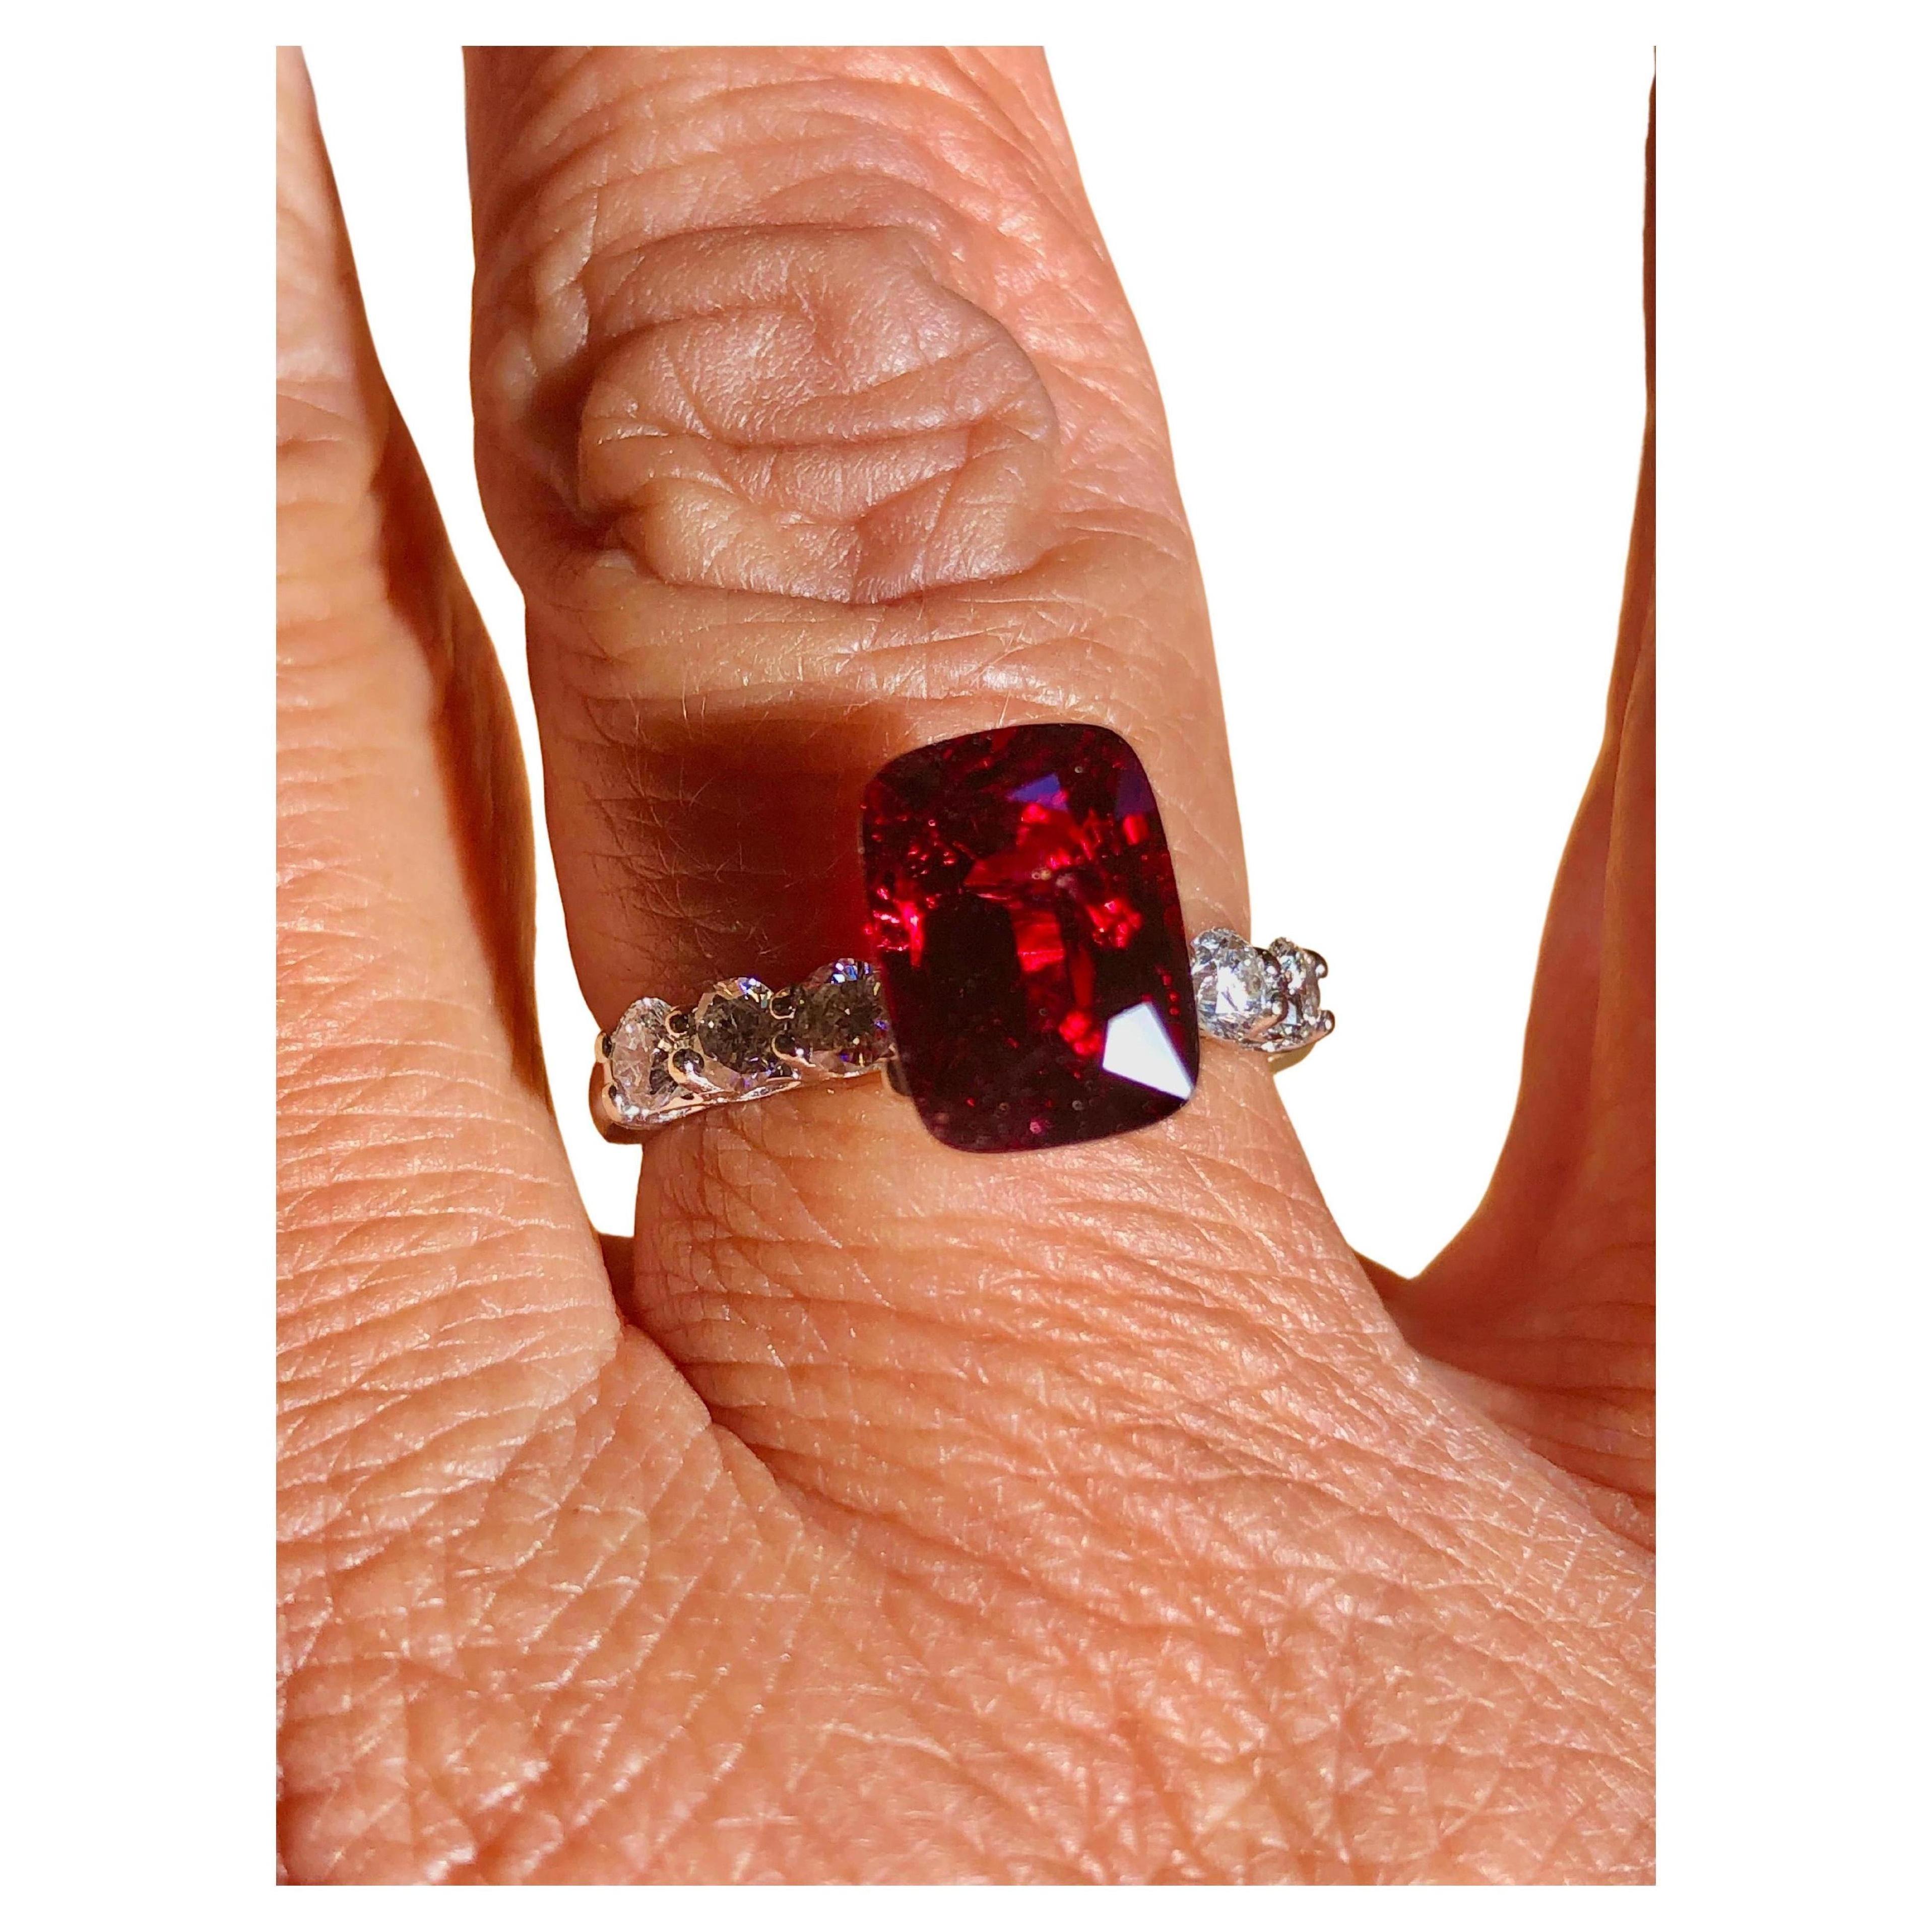 Certified Cushion-Cut No Heat  Burmese Red Spinel.
Gemstone: Natural Spinel
Carat Weight: 3.14 Carats
Measurements: 9.87 x 7.21 x 5.08 mm.
Shape: Antique Cushion
Cutting Style: Faceted
Color: Red
Origin: Burma 
Treatments: None (100% Natural &